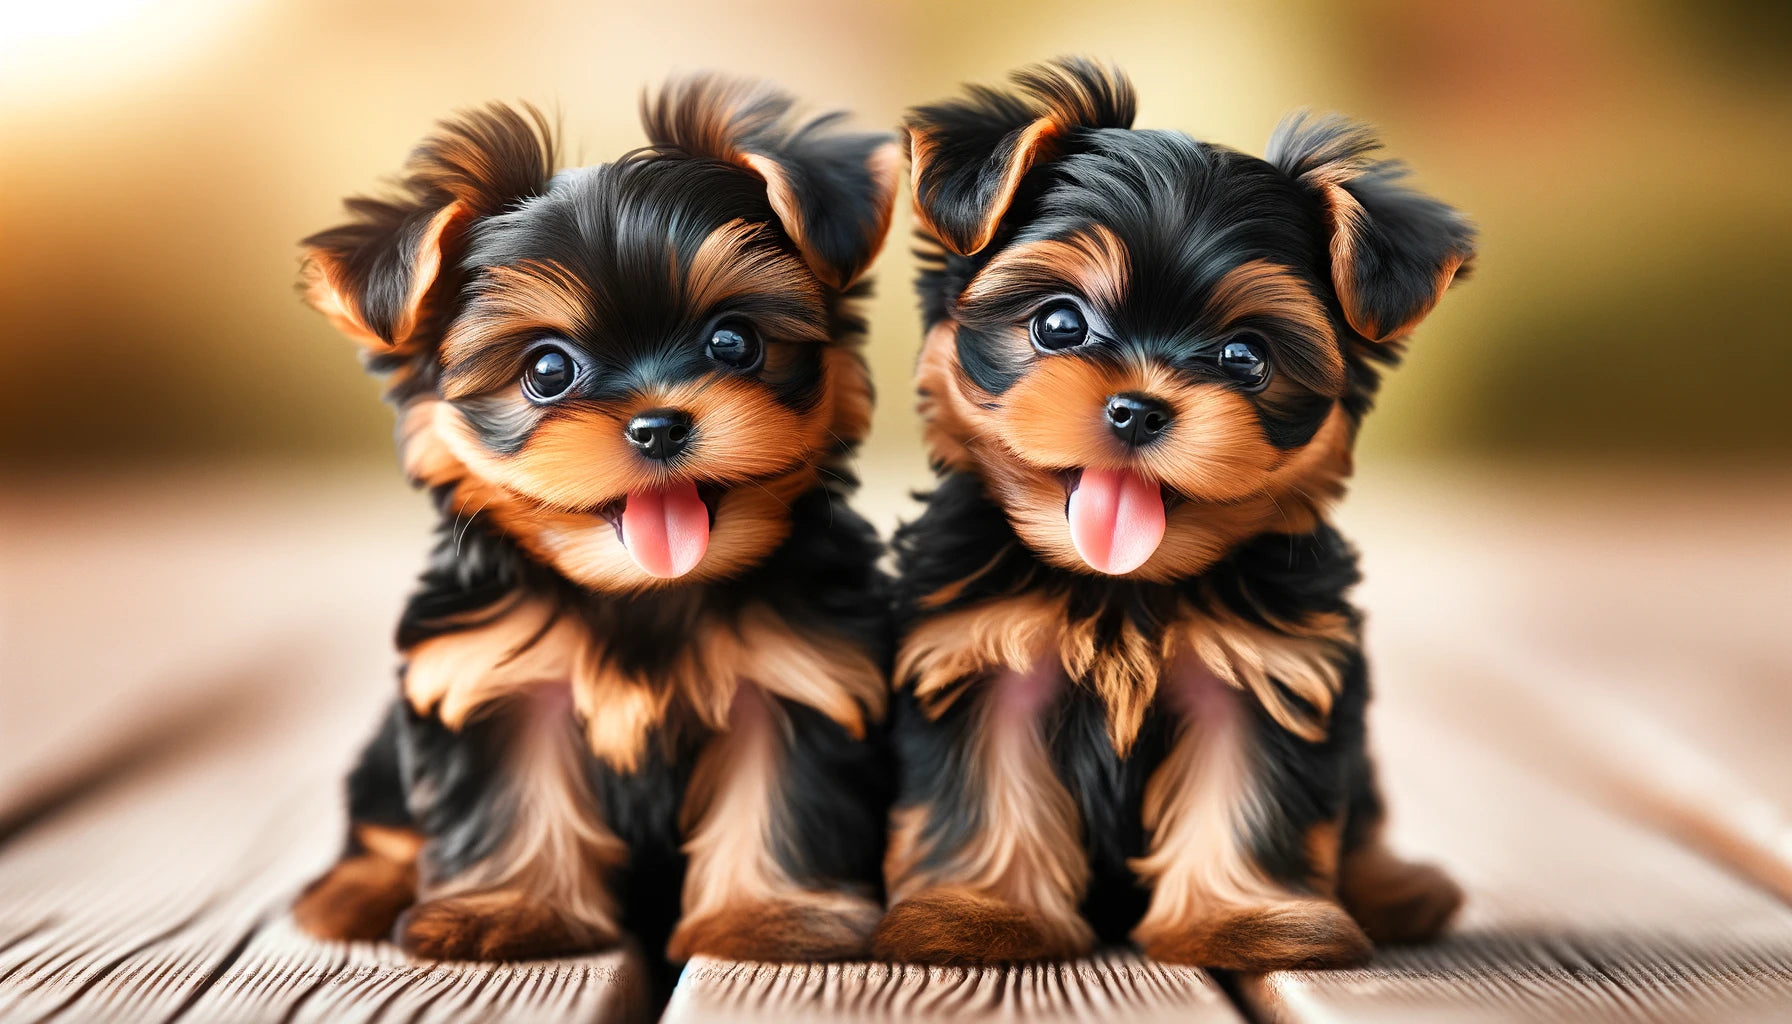 Teacup Yorkie puppies appear very young with their small size and puppy-like features.